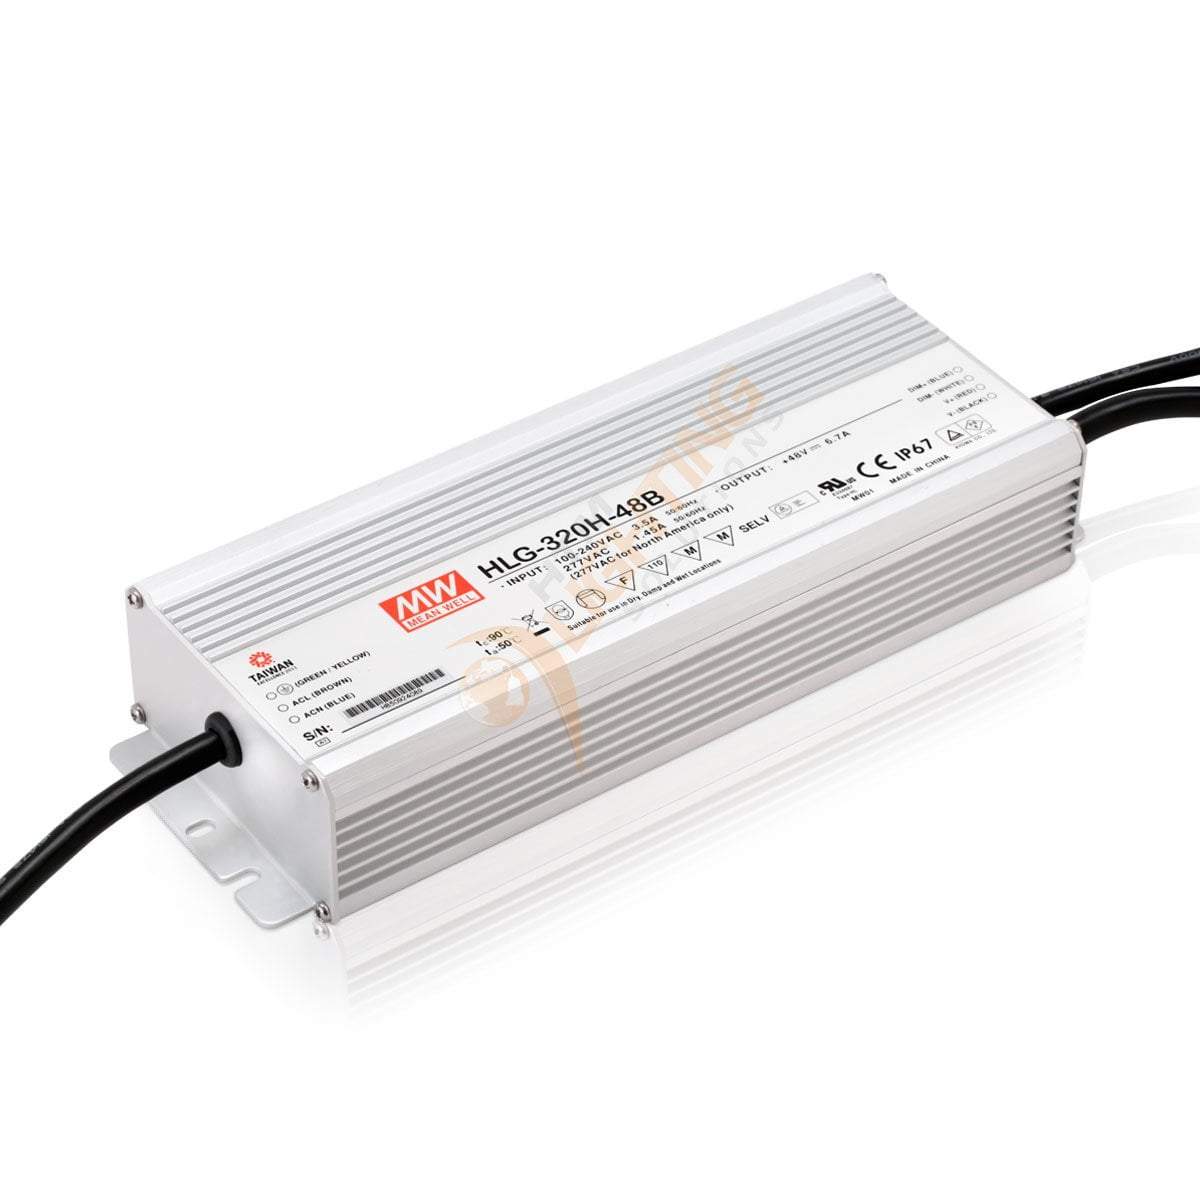 Mean Well 320W LED Driver - 24V DC - A Type Dimming Function - HLG-320